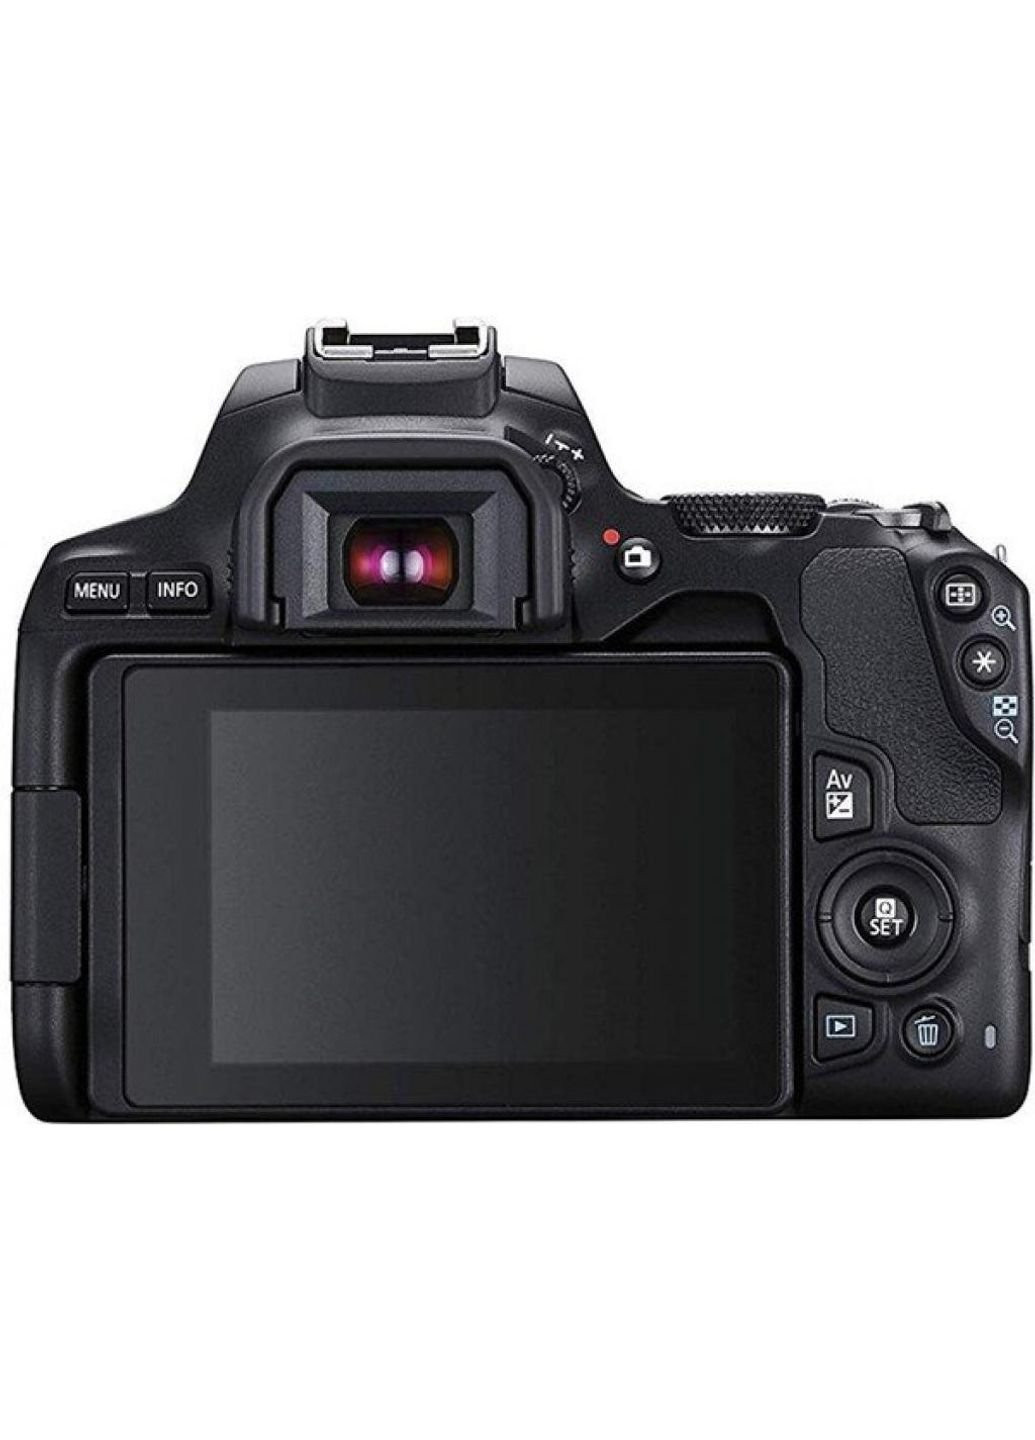 Цифрова камера EOS 250D kit 18-55 IS STM Black Canon (251243475)